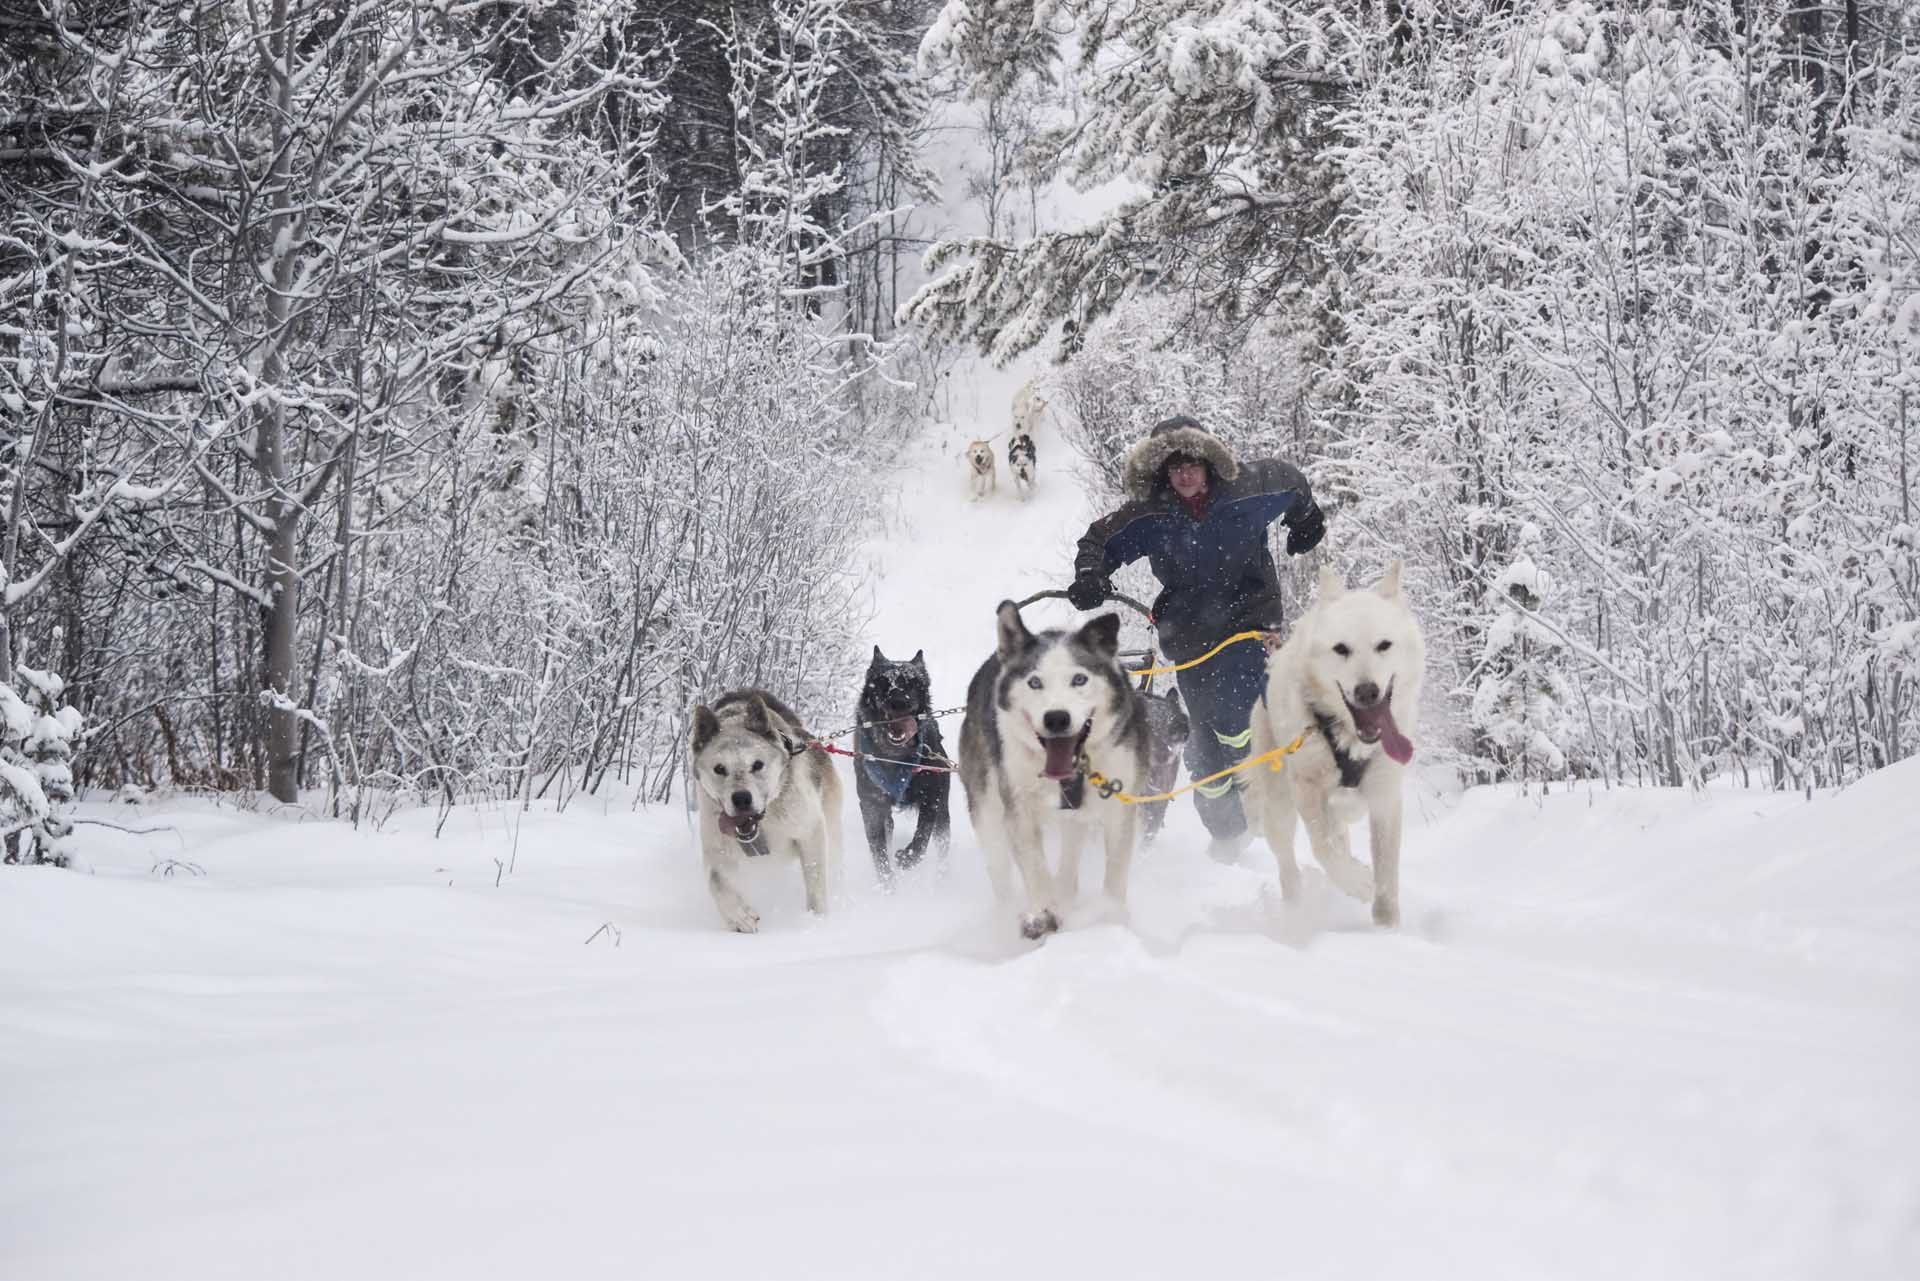 Dogs pulling a man on a sled in a snowy environment